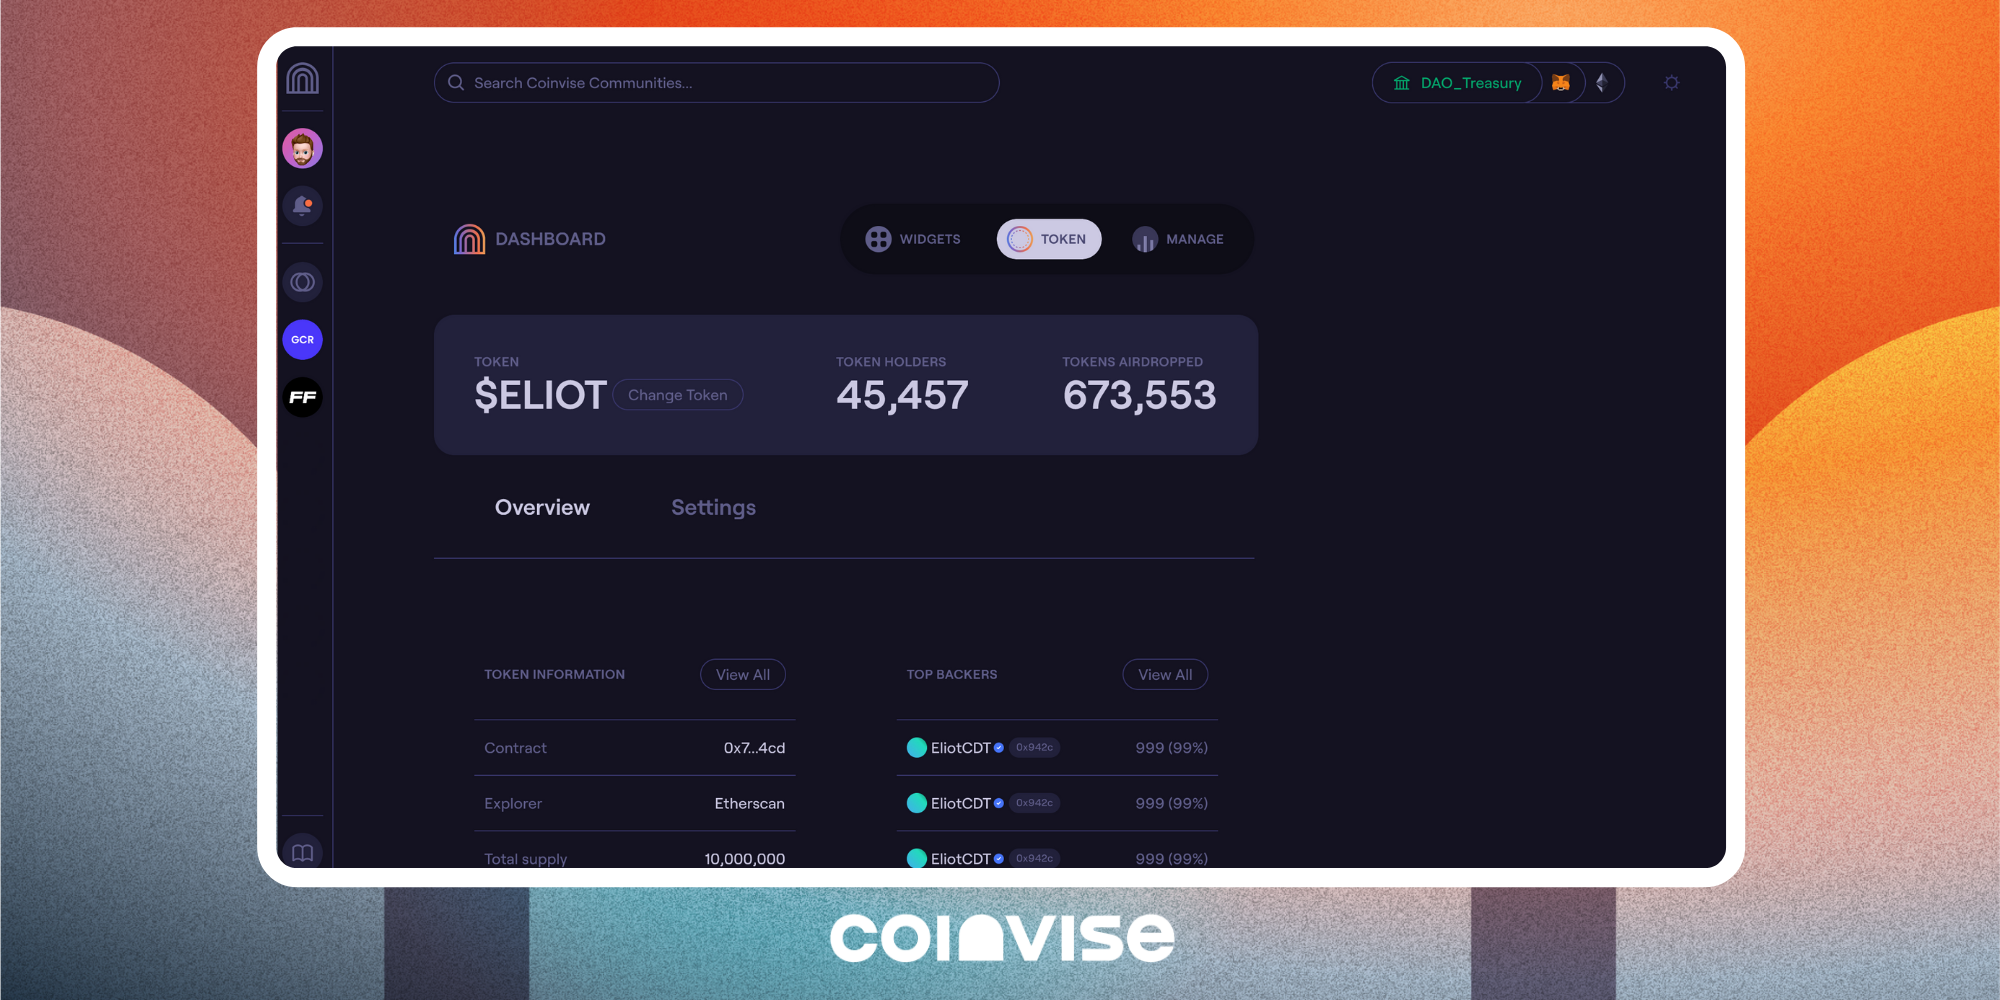 Coinvise's Dashboard - Token Tab